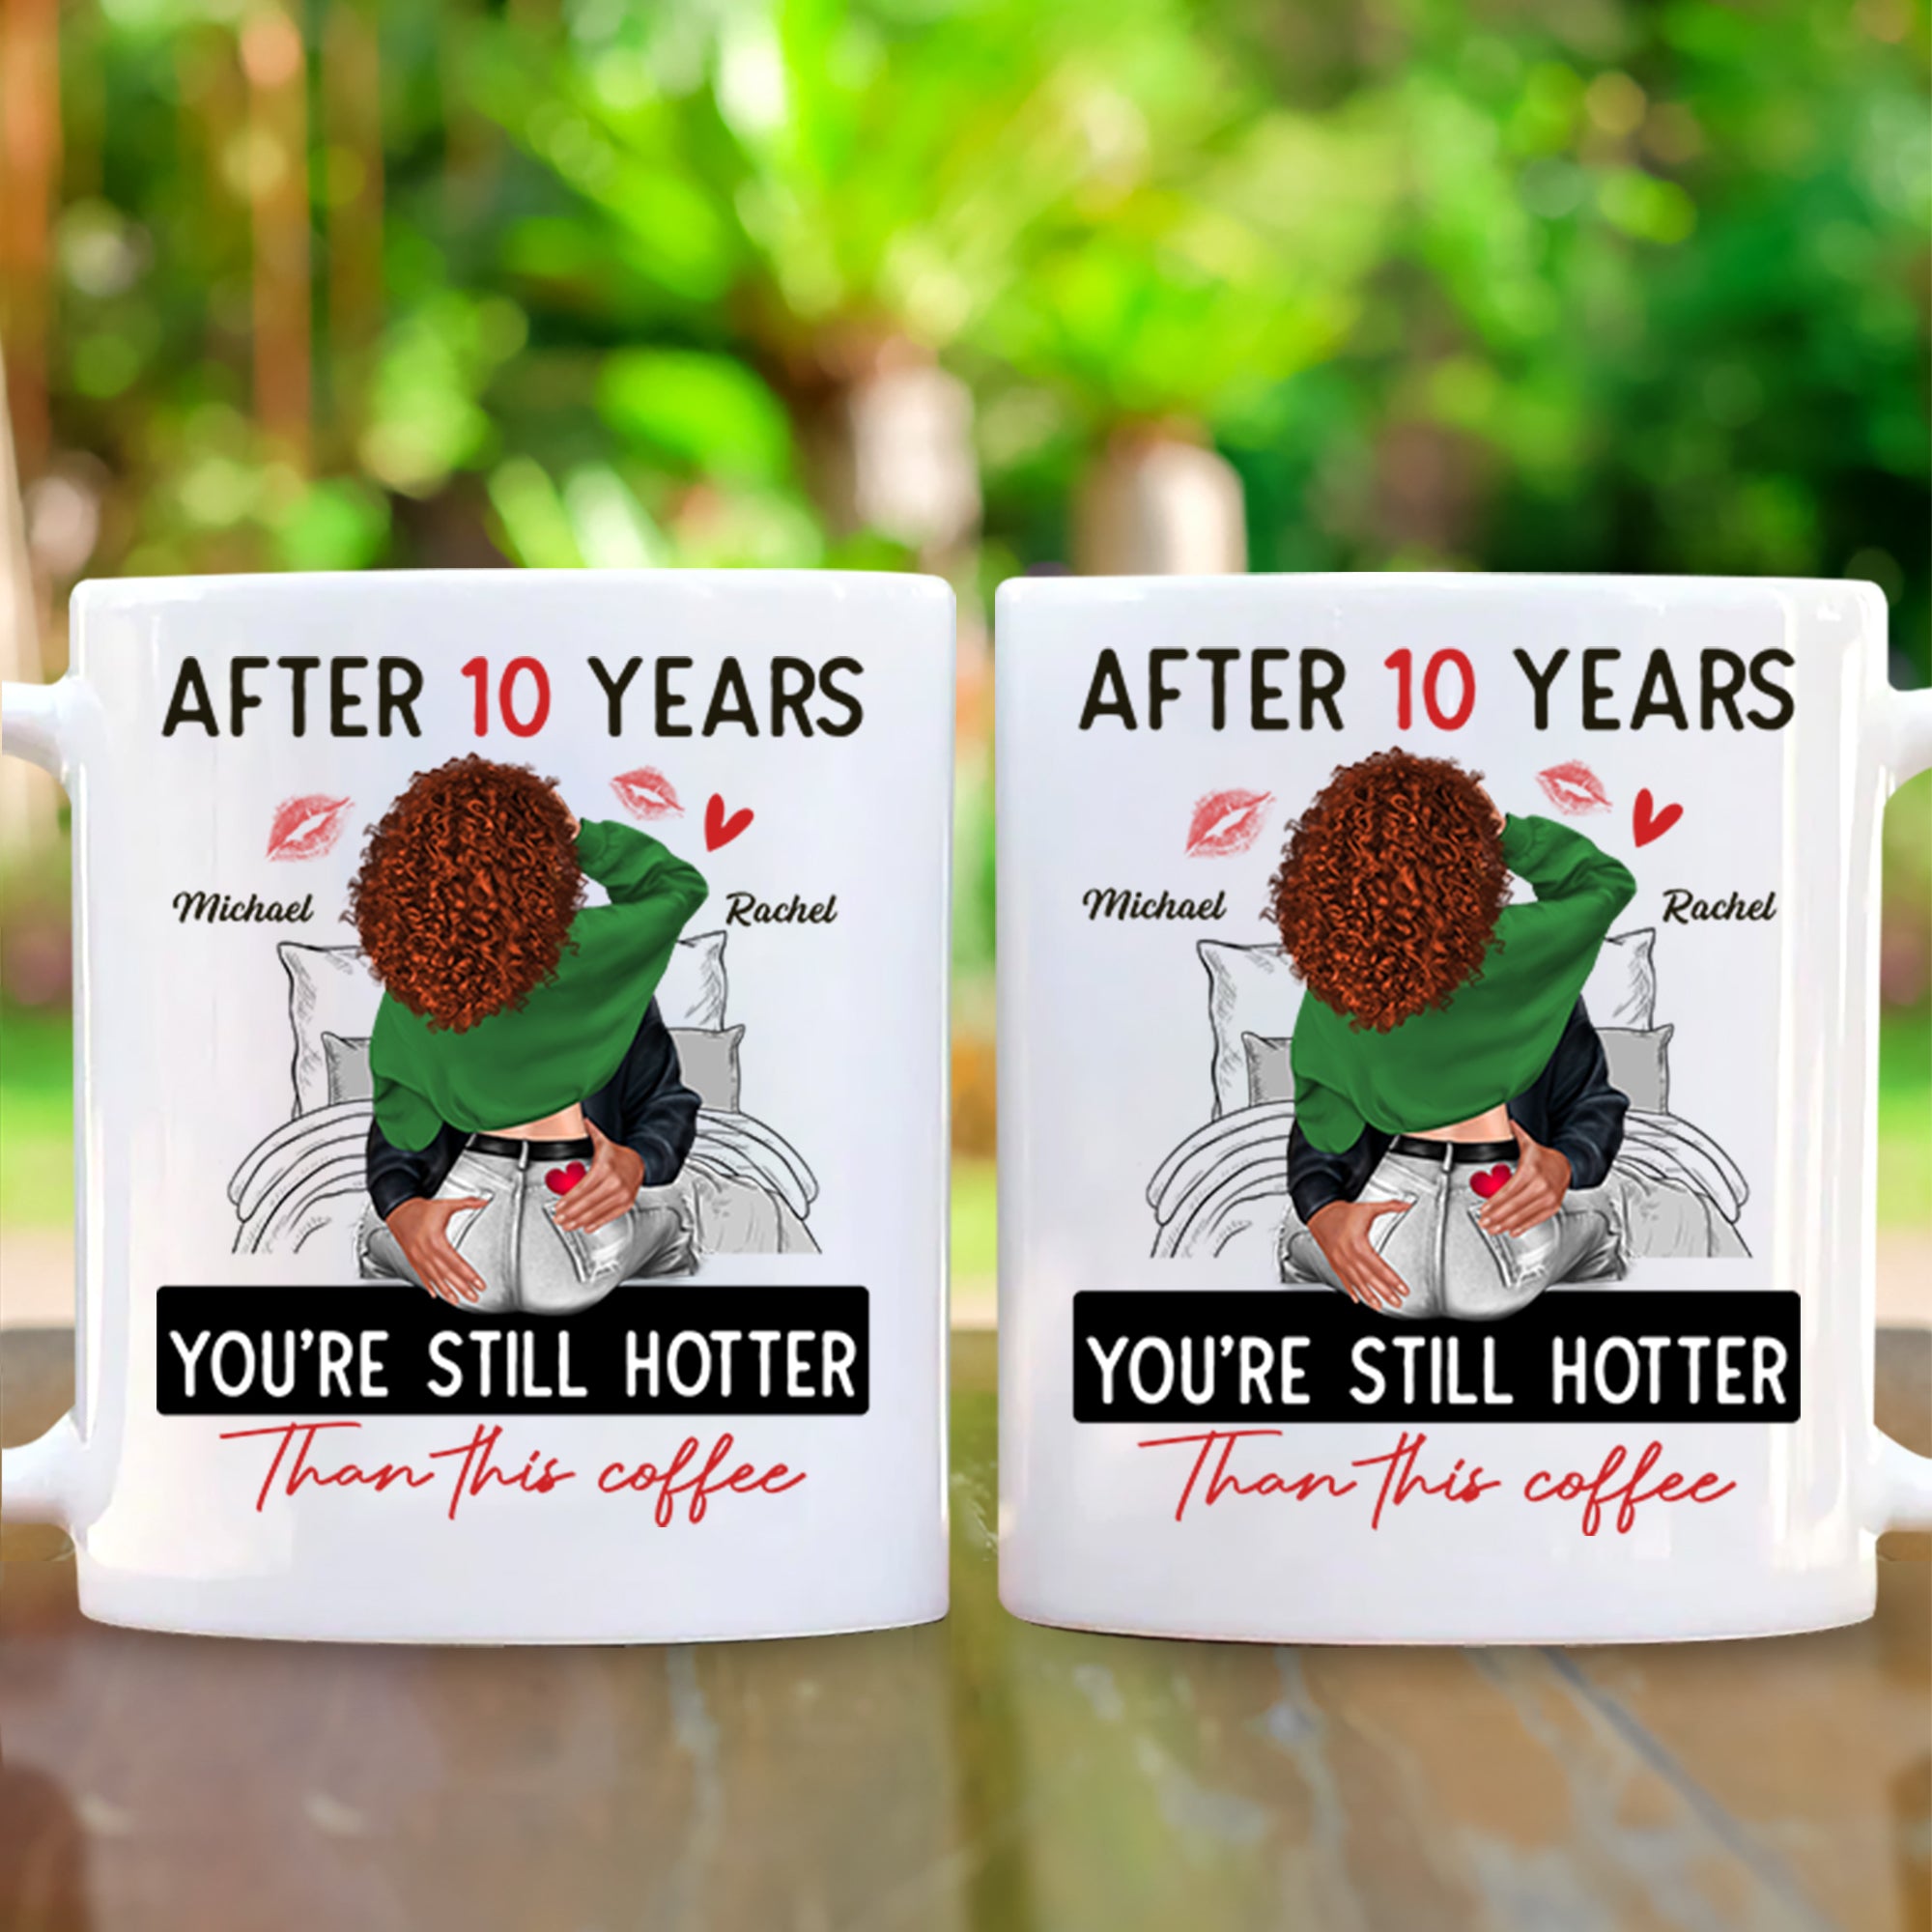 After 10 Years You're Still Hotter Than This Coffee - Personalized Mug - Valentine's Day Gifts For Her, Wife, Girlfriend